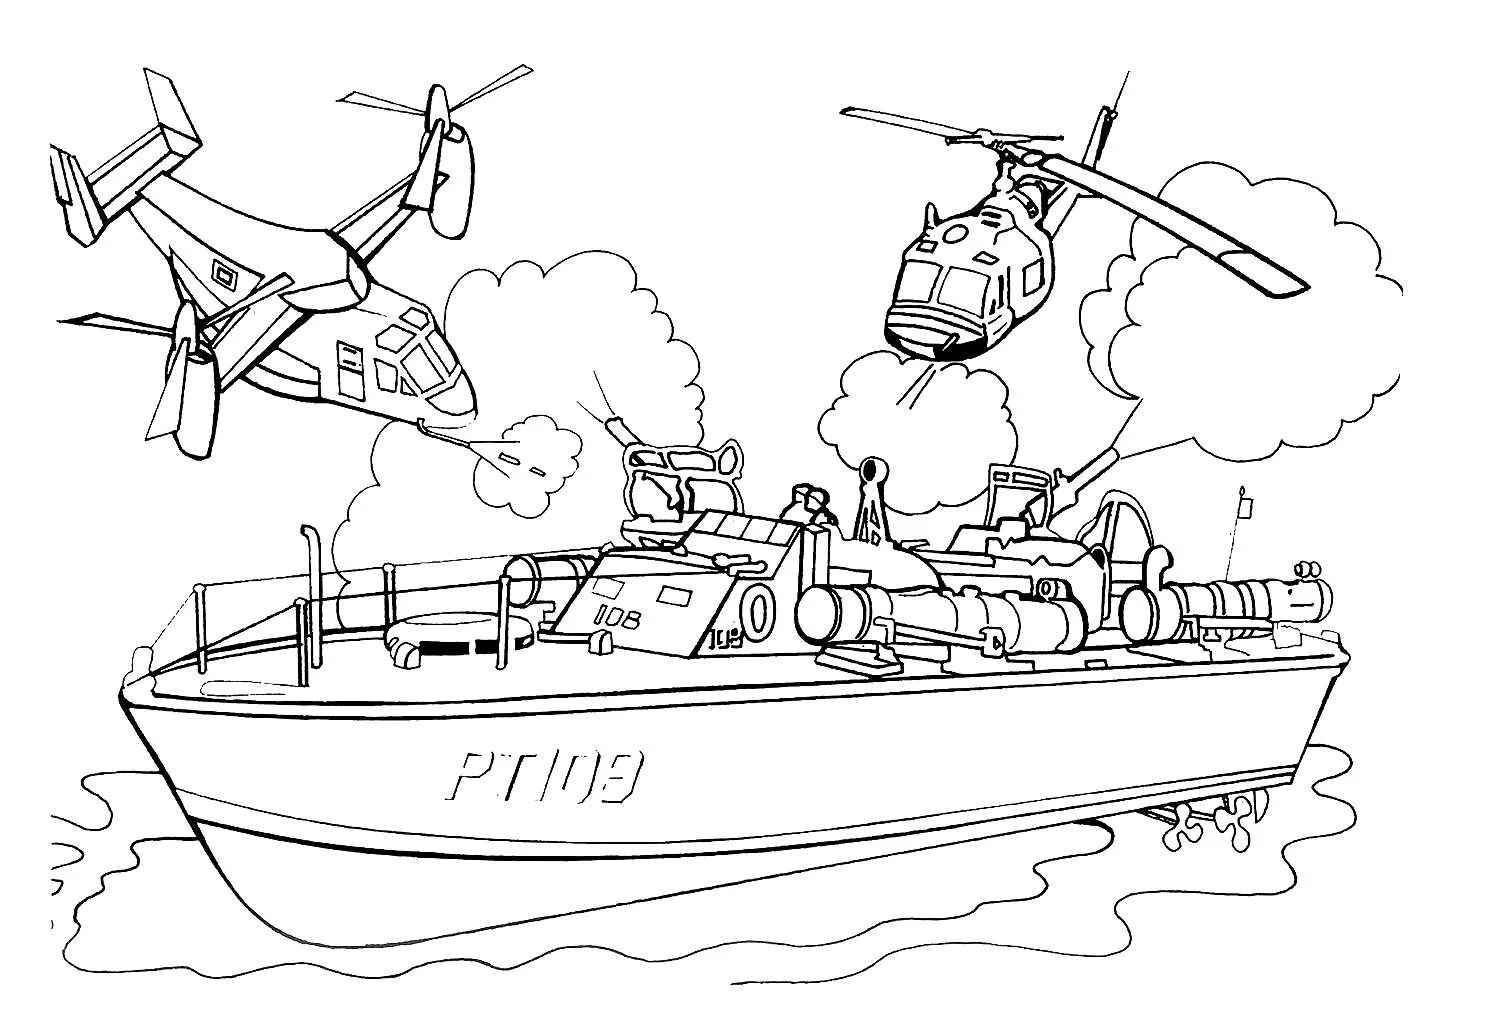 Dazzling military vehicle coloring page